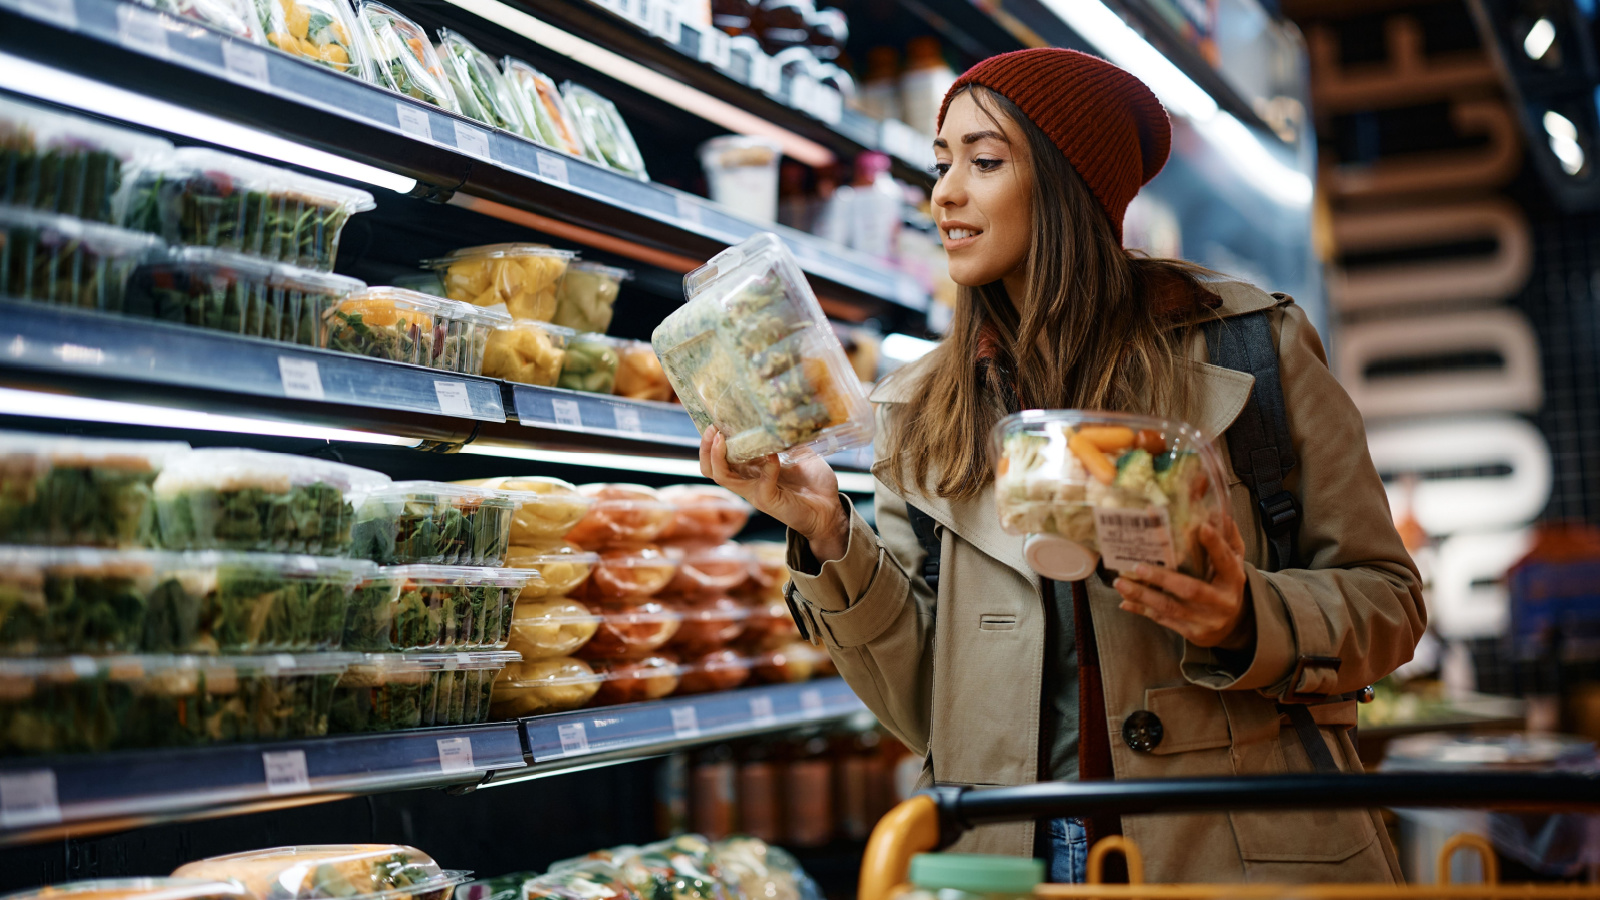 image credit: Drazen-Zigic/Shutterstock <p><span>ShopSavvy is designed to help users conquer their impulsive spending habits. With alerts and reminders, it keeps temptation at bay. For those struggling with impulse buys, this app is great for price comparison to stop spendthrift tendencies.</span></p>